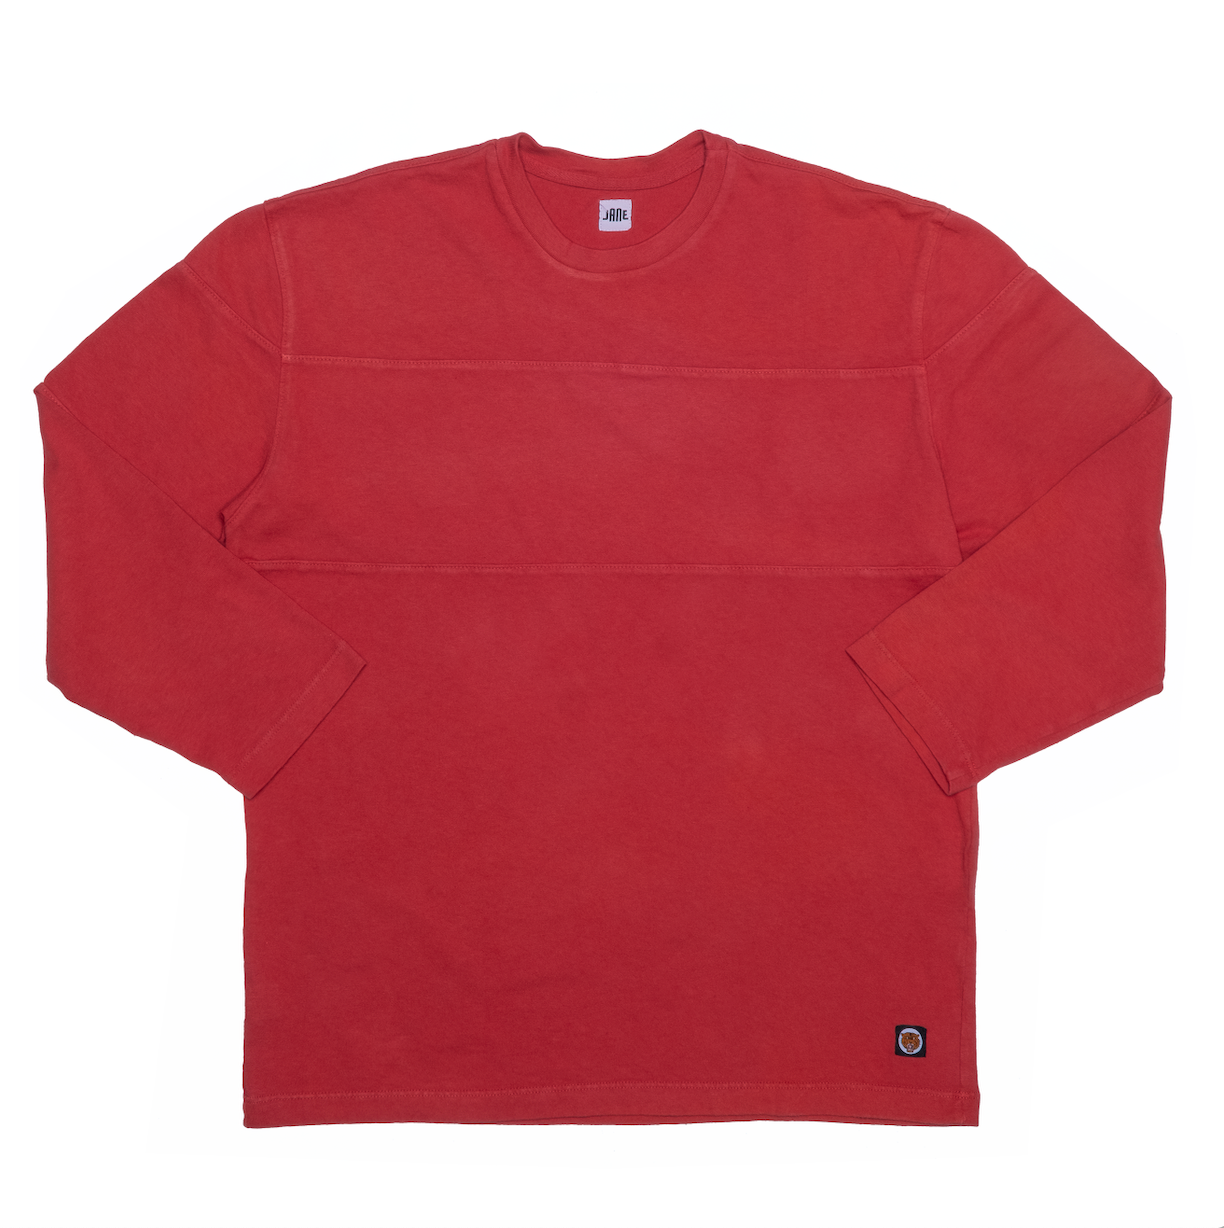 Garment Dyed Monroe Jersey - Red